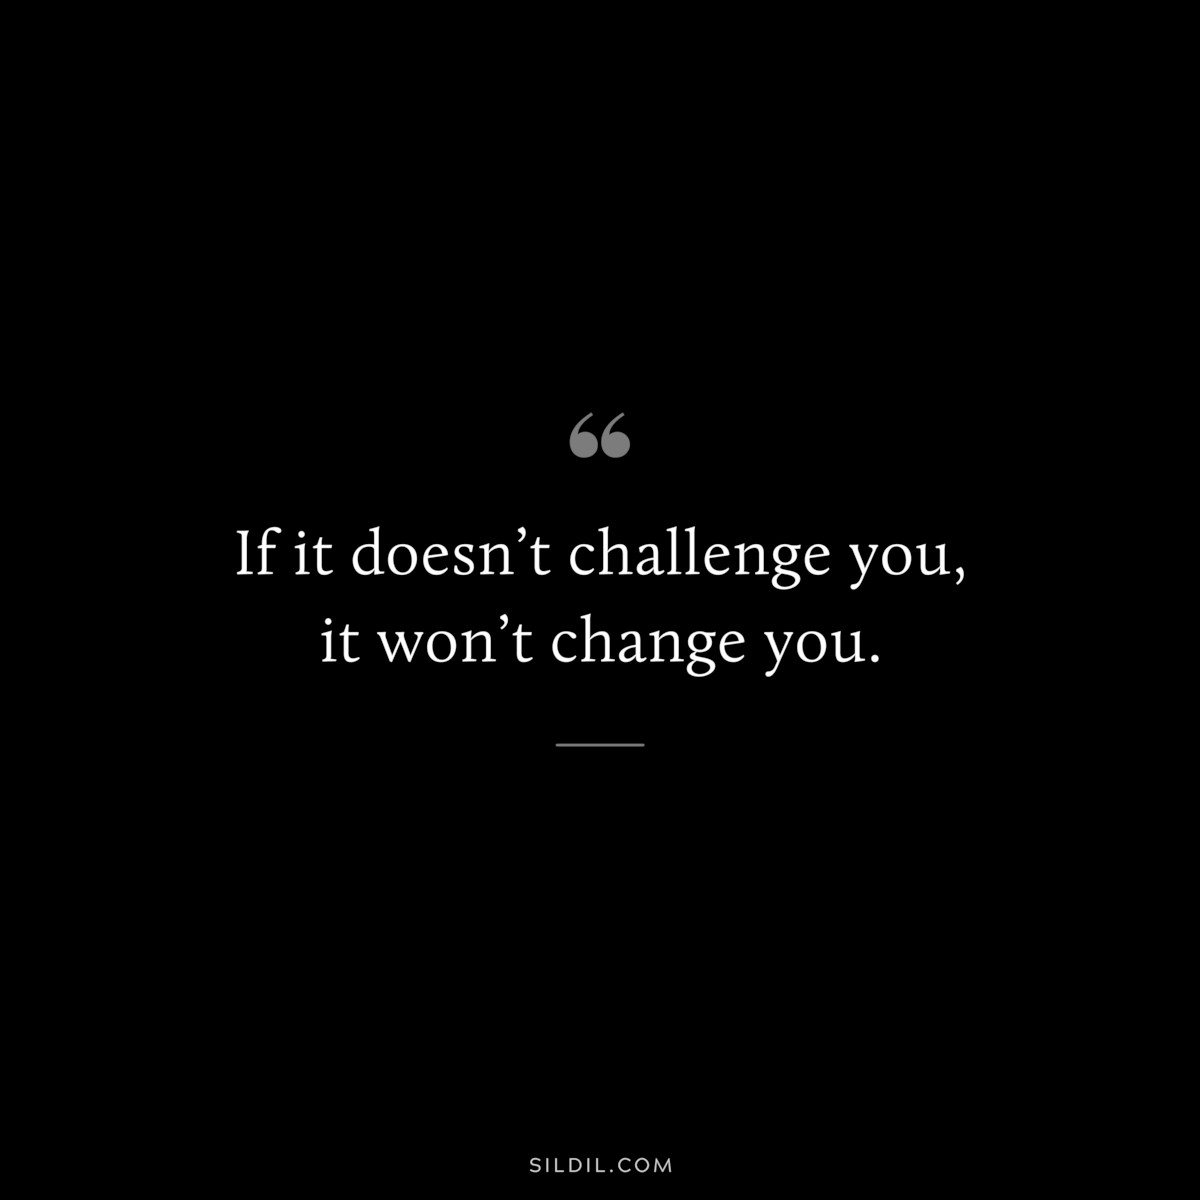 If it doesn’t challenge you, it won’t change you.